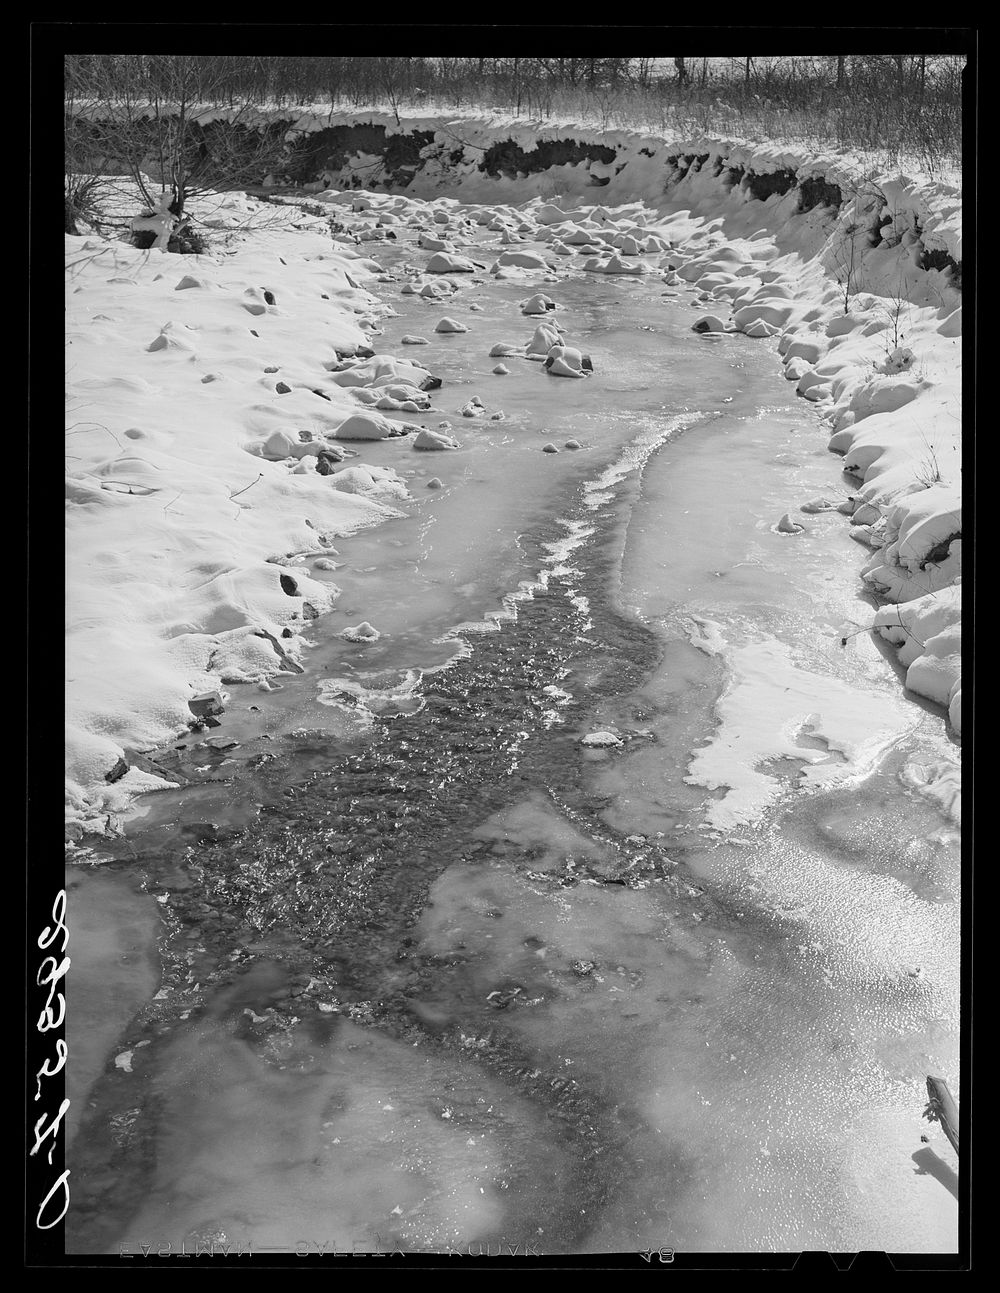 Creek. Ross County, Ohio. Sourced from the Library of Congress.